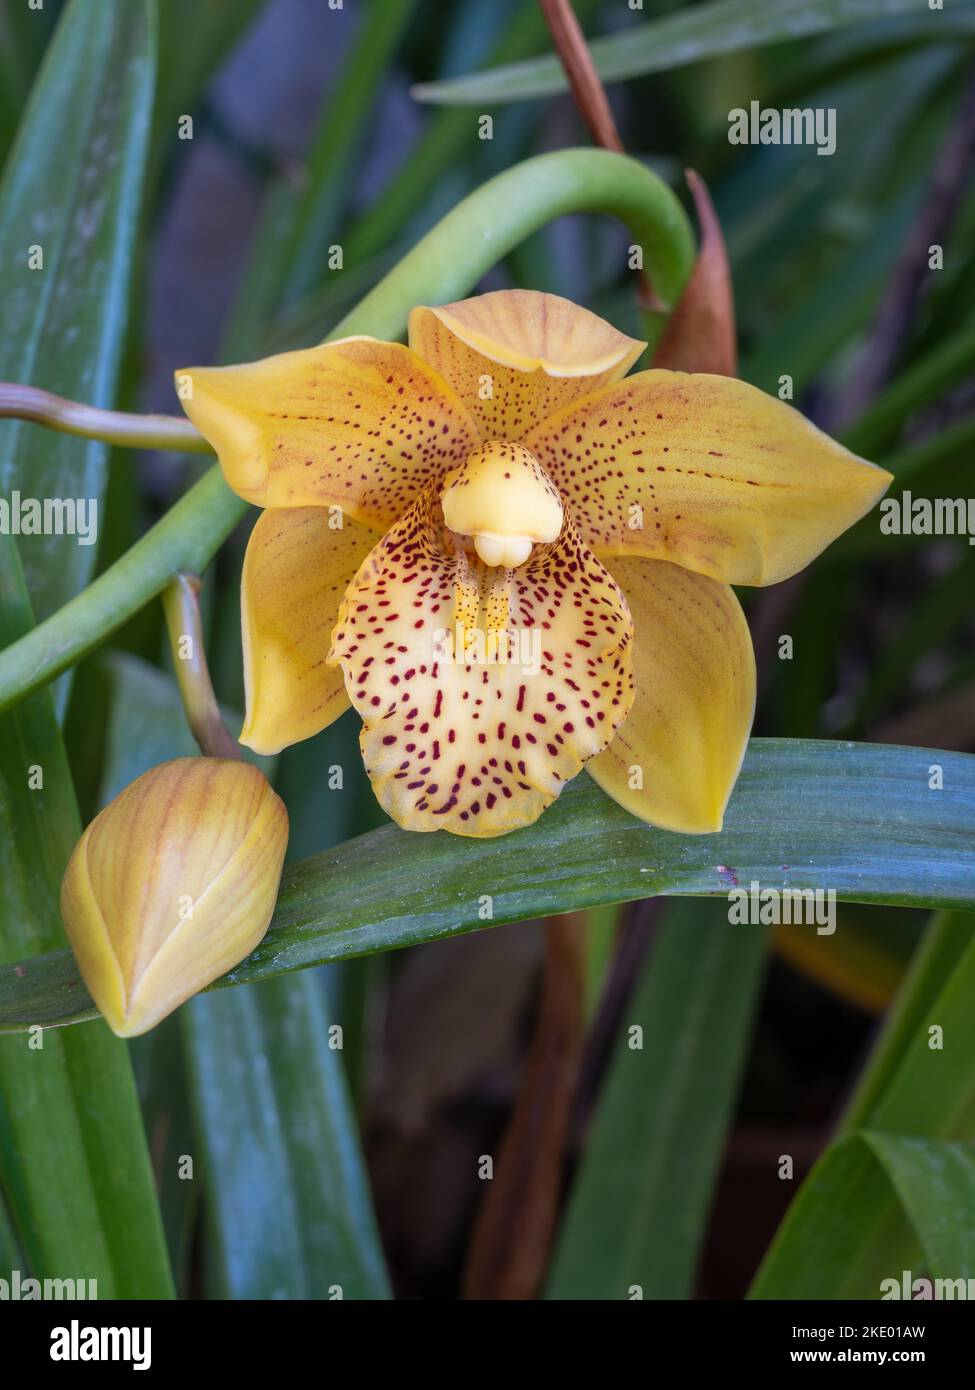 Closeup view of fresh yellow and brown flower and bud of cymbidium orchid hybrid blooming outdoors in garden Stock Photo